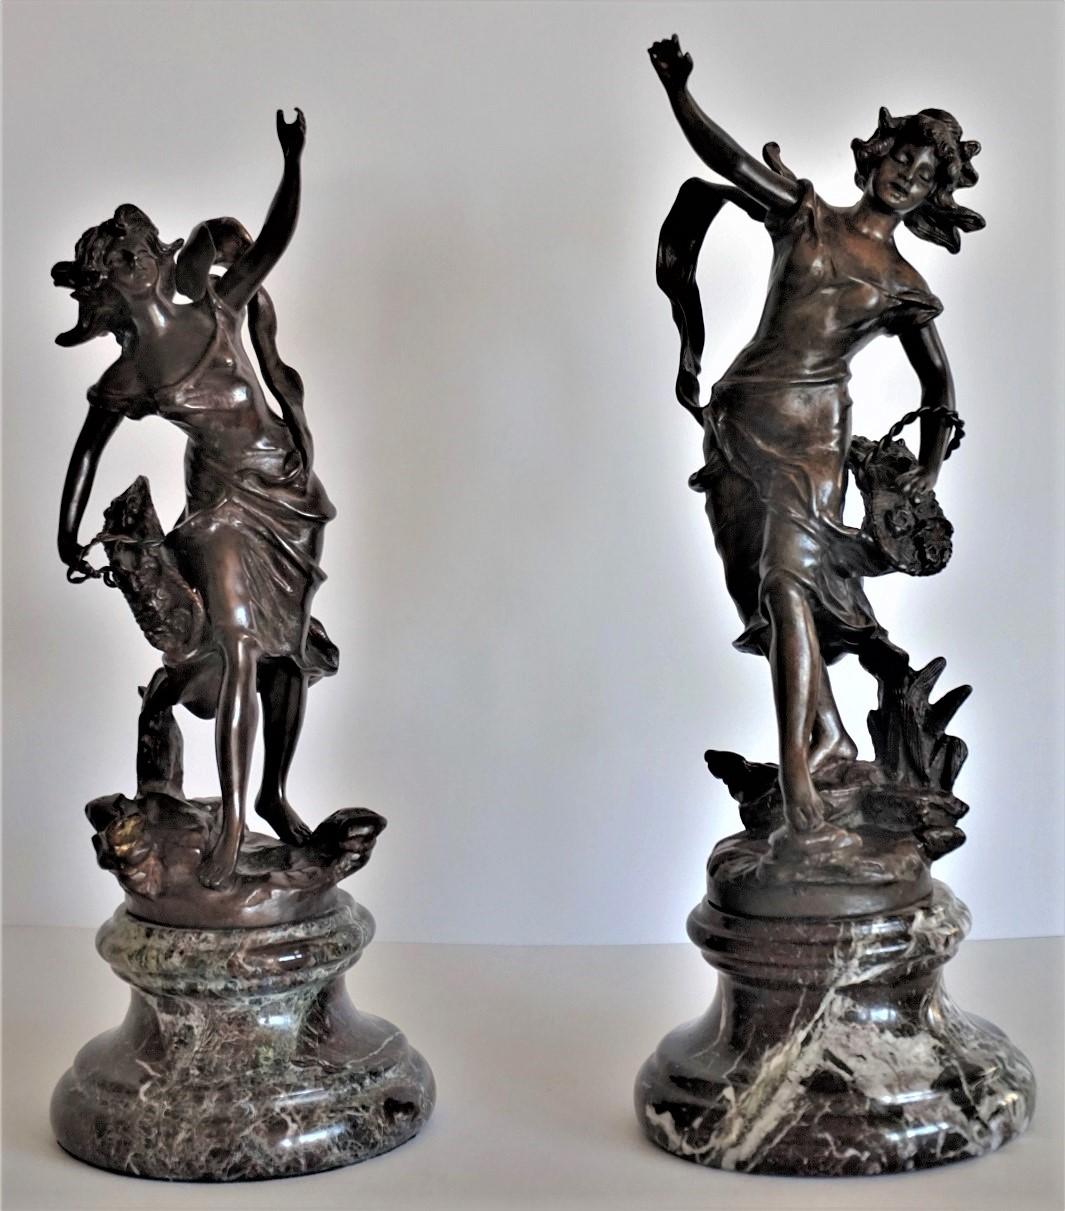 Set of two patinated bronze female figures on marble bases, allegory of freedom, dancing young women with a flower basket, France late 19th century, both sculptures signed Geo Maxim.

Measures: One sculpture is 15 inches high, 5.50 inches diameter